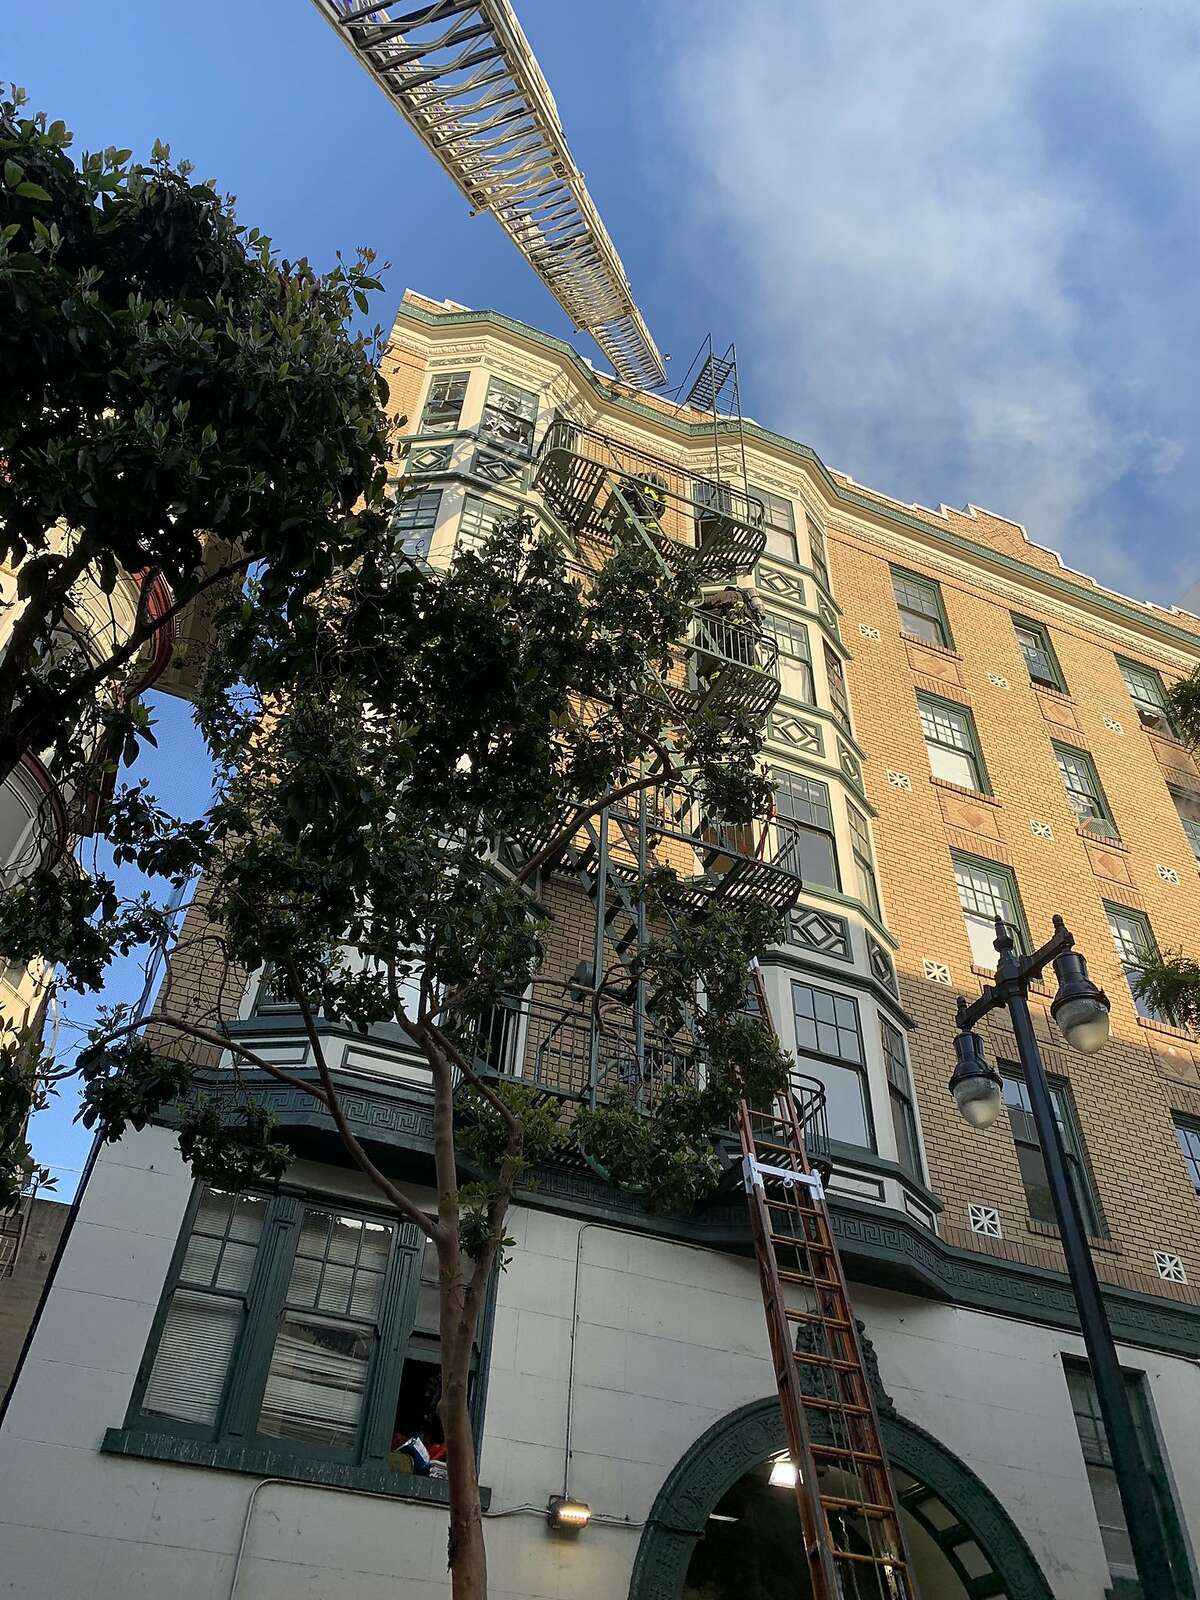 The San Francisco Fire Department contained a one-alarm fire that displaced approximately 60 residents of an apartment complex in the Tenderloin and left 20 injured on Saturday, June 19, 2021.